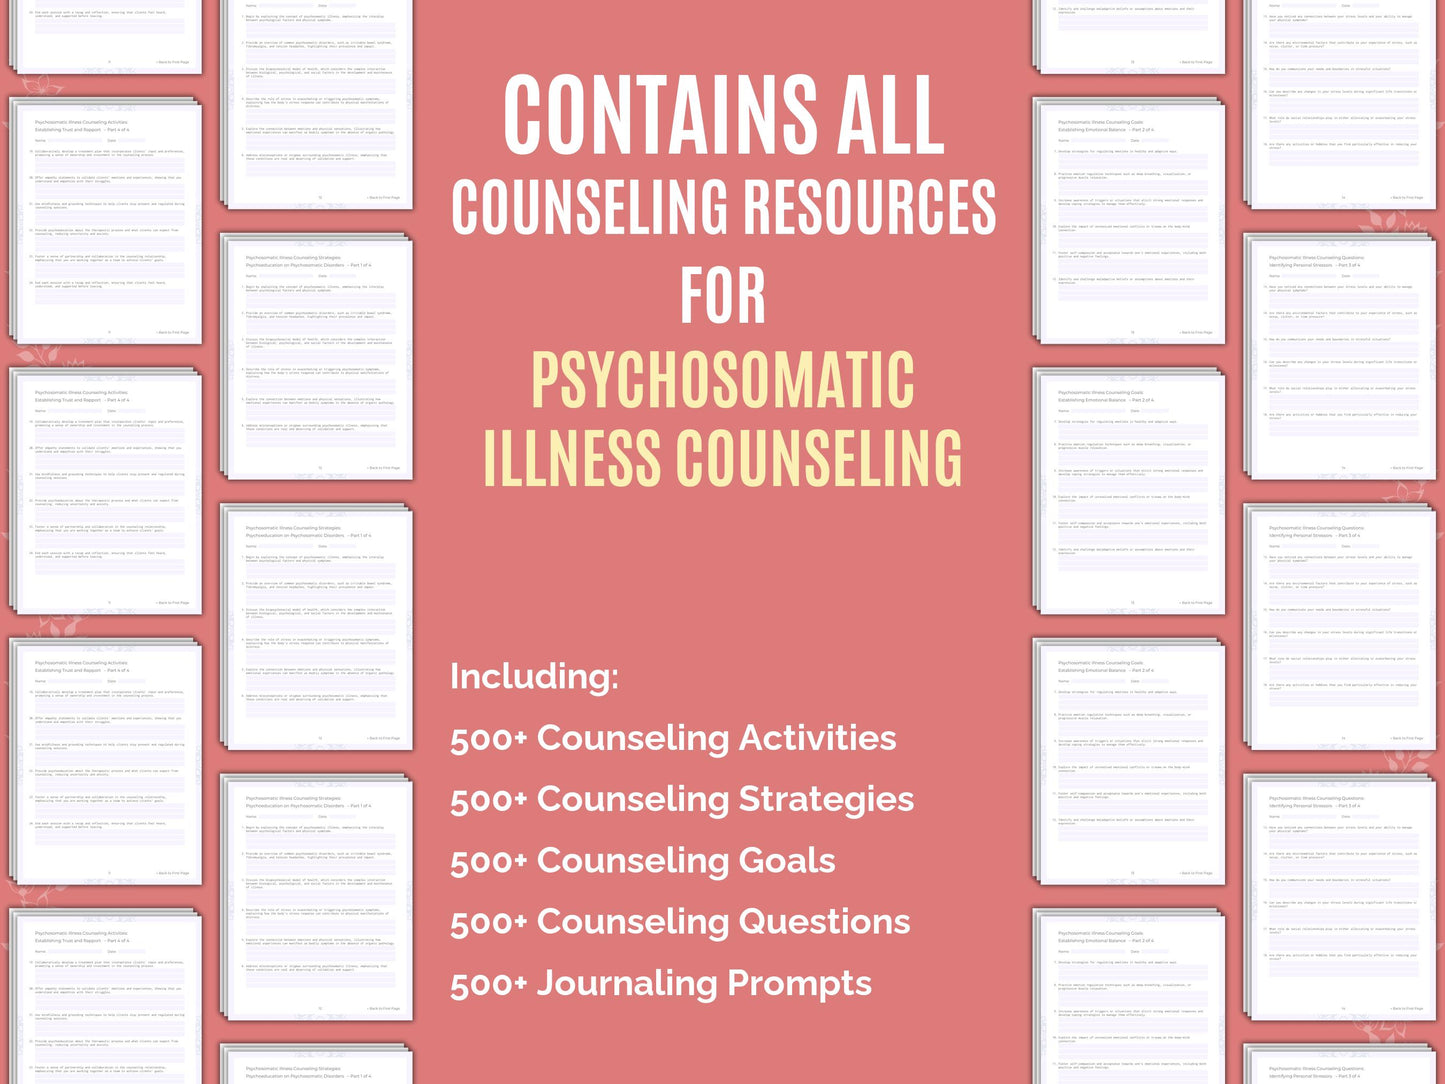 Resource, Counseling, Therapist, Psychosomatic Bundle, Illness, Psychosomatic, Psychosomatic Idea, Counselor, Therapy, Mental Health, Workbook, Template, Worksheet